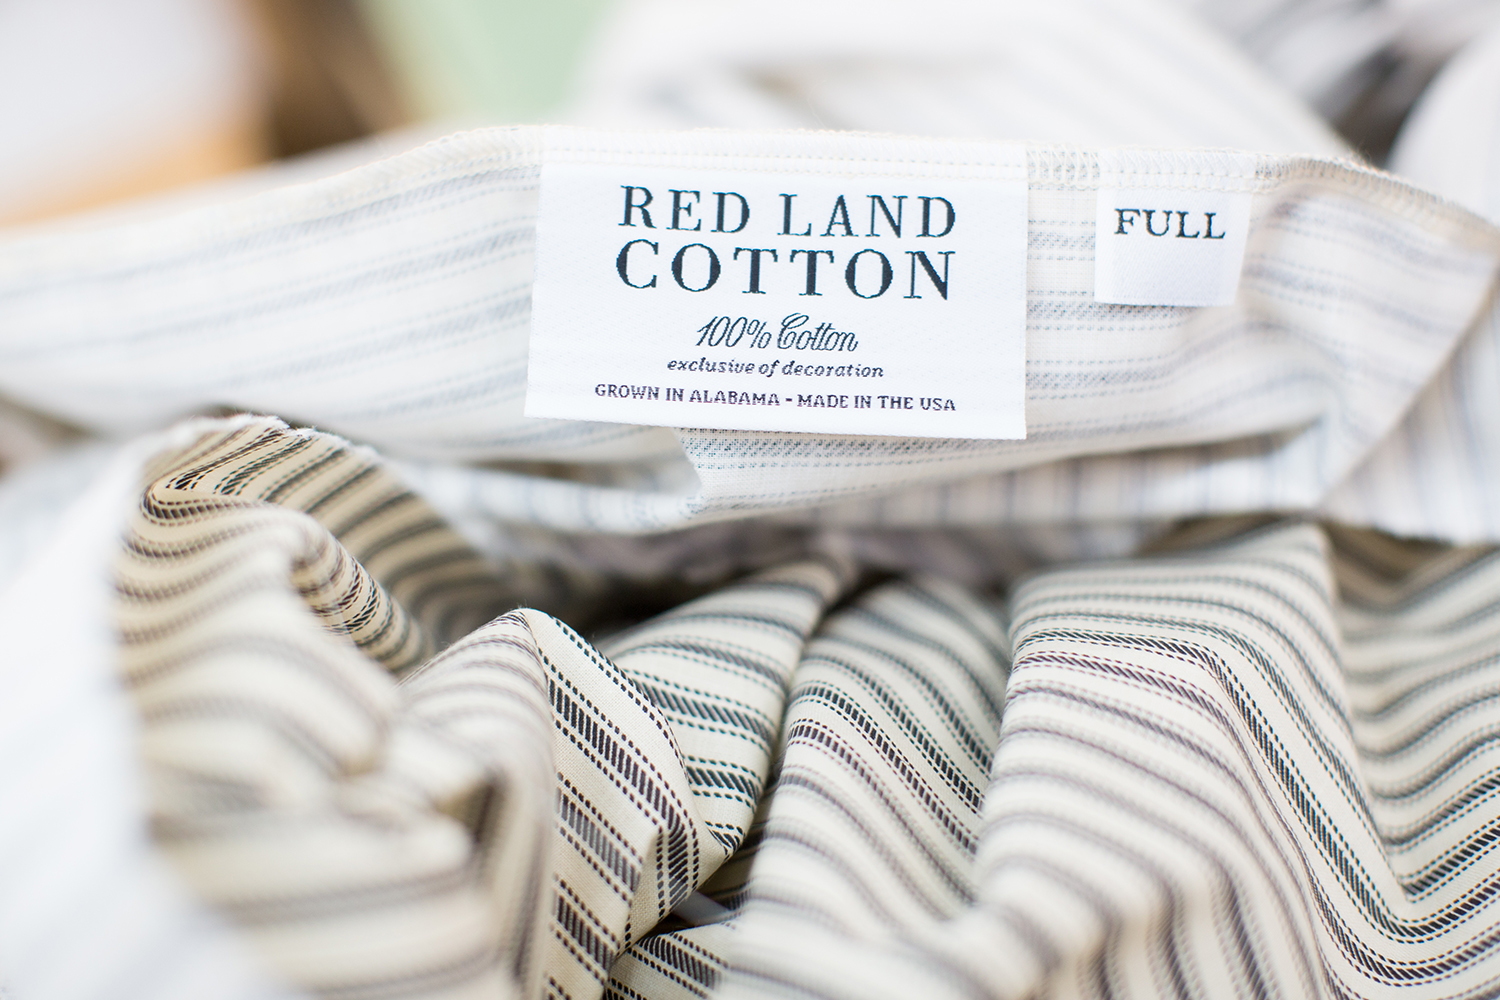 detail shot of Red Land Cotton lable